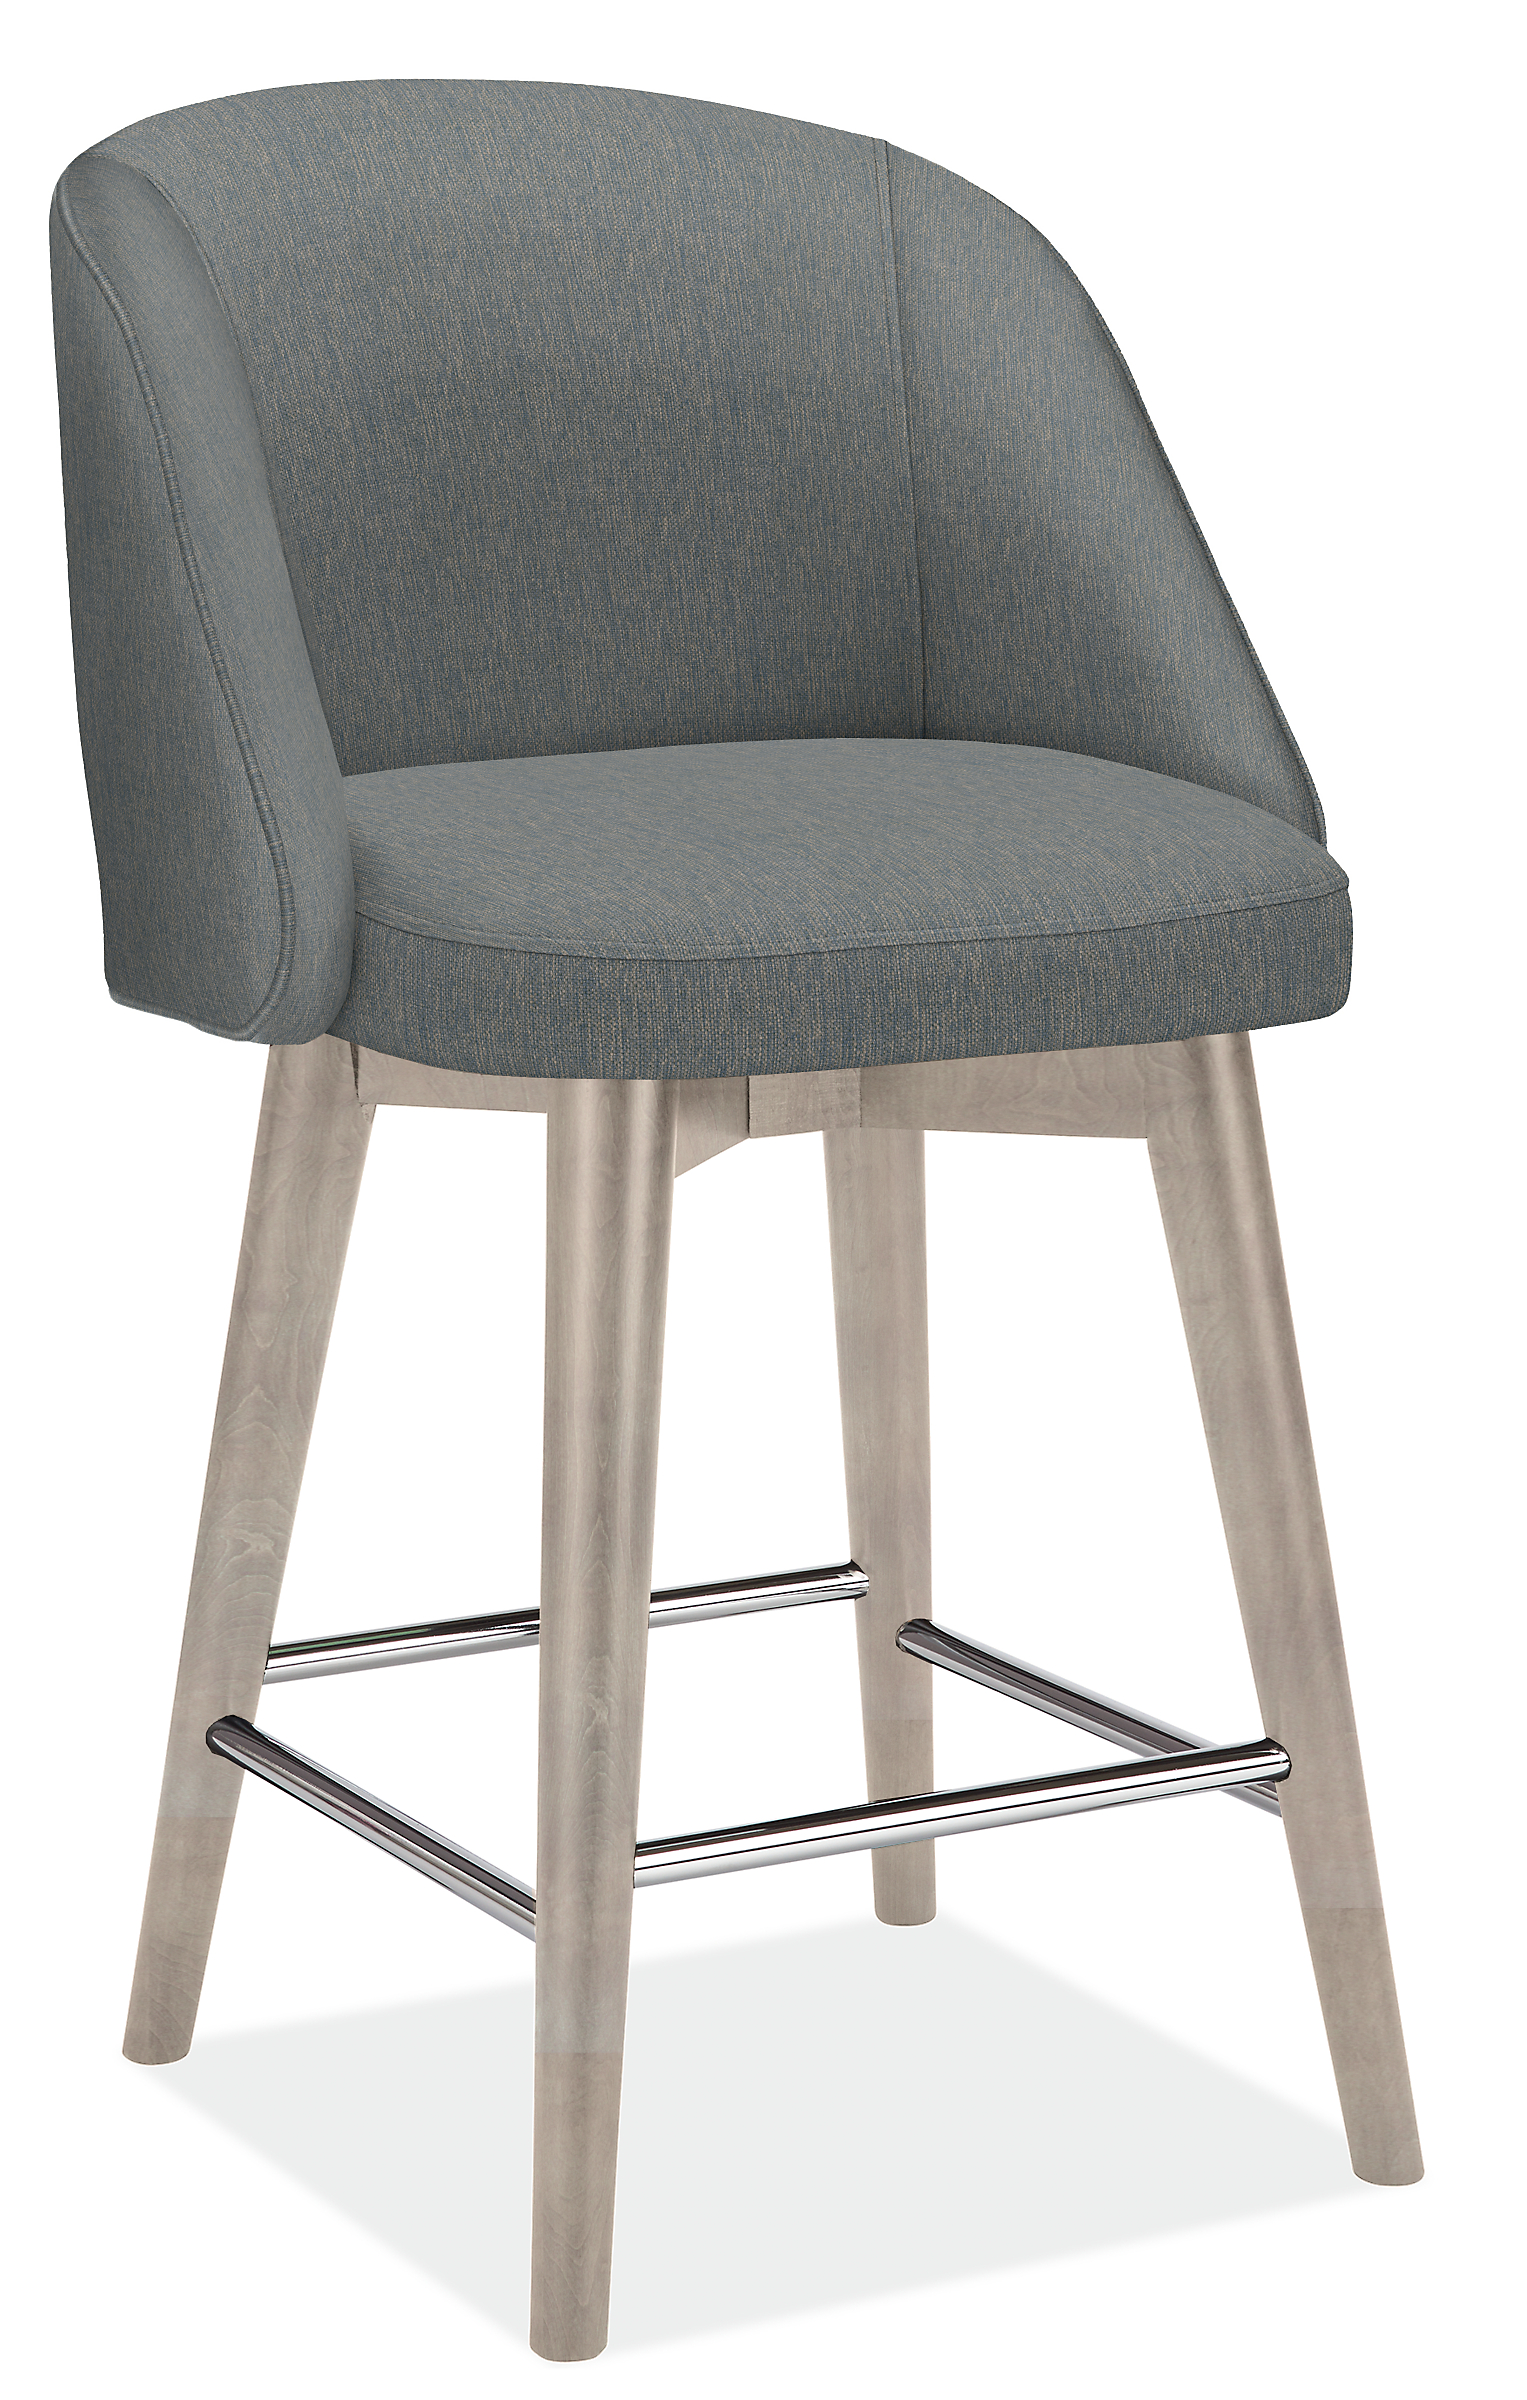 Cora Swivel Counter Stool in Sumner Cadet with Shell Legs